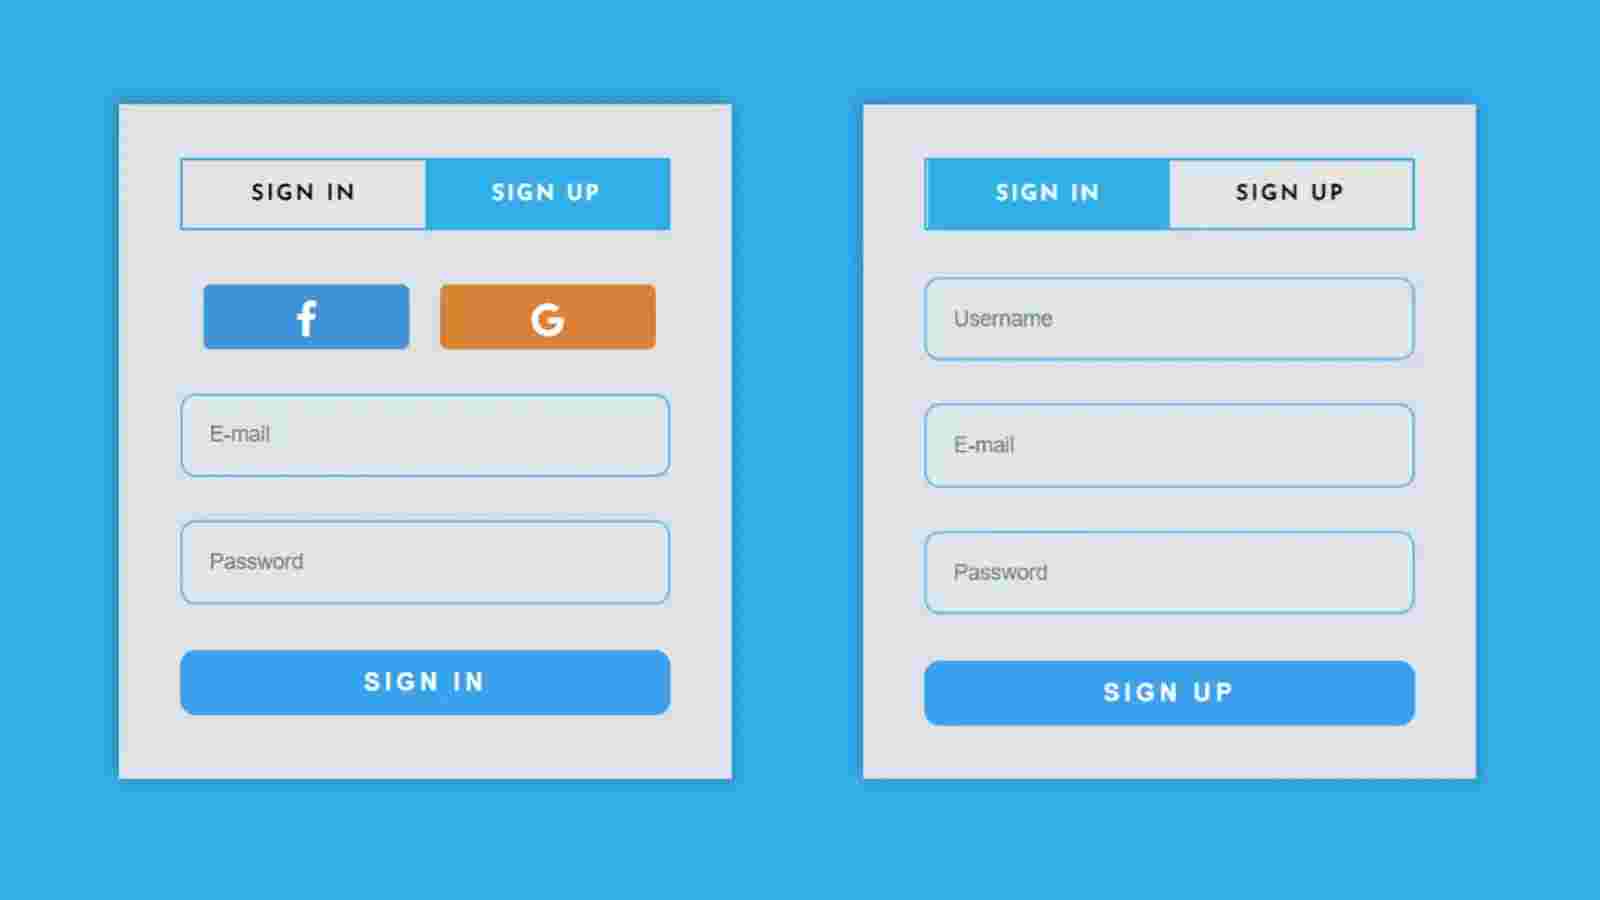 Free Course: Responsive Login & Registration Form Using HTML CSS JavaScript, Login Form Tutorial In Hindi 2021 from CODE4EDUCATION